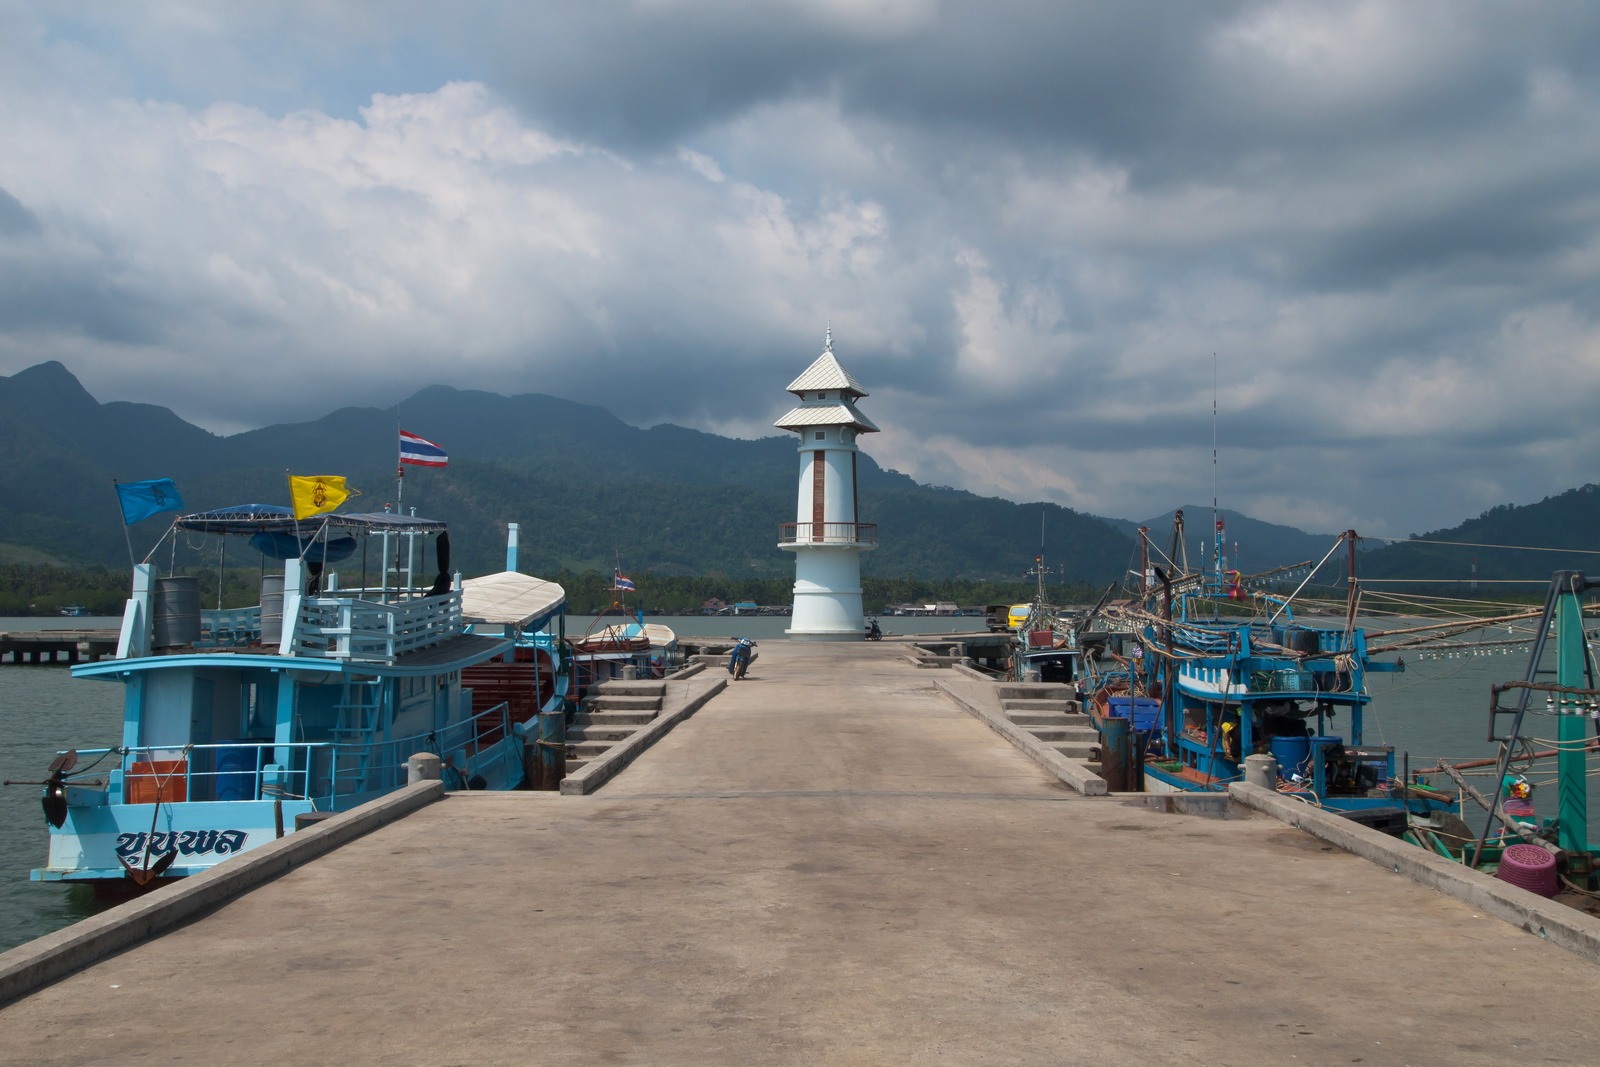 The pier and lighthouse of Baan Salak Petch